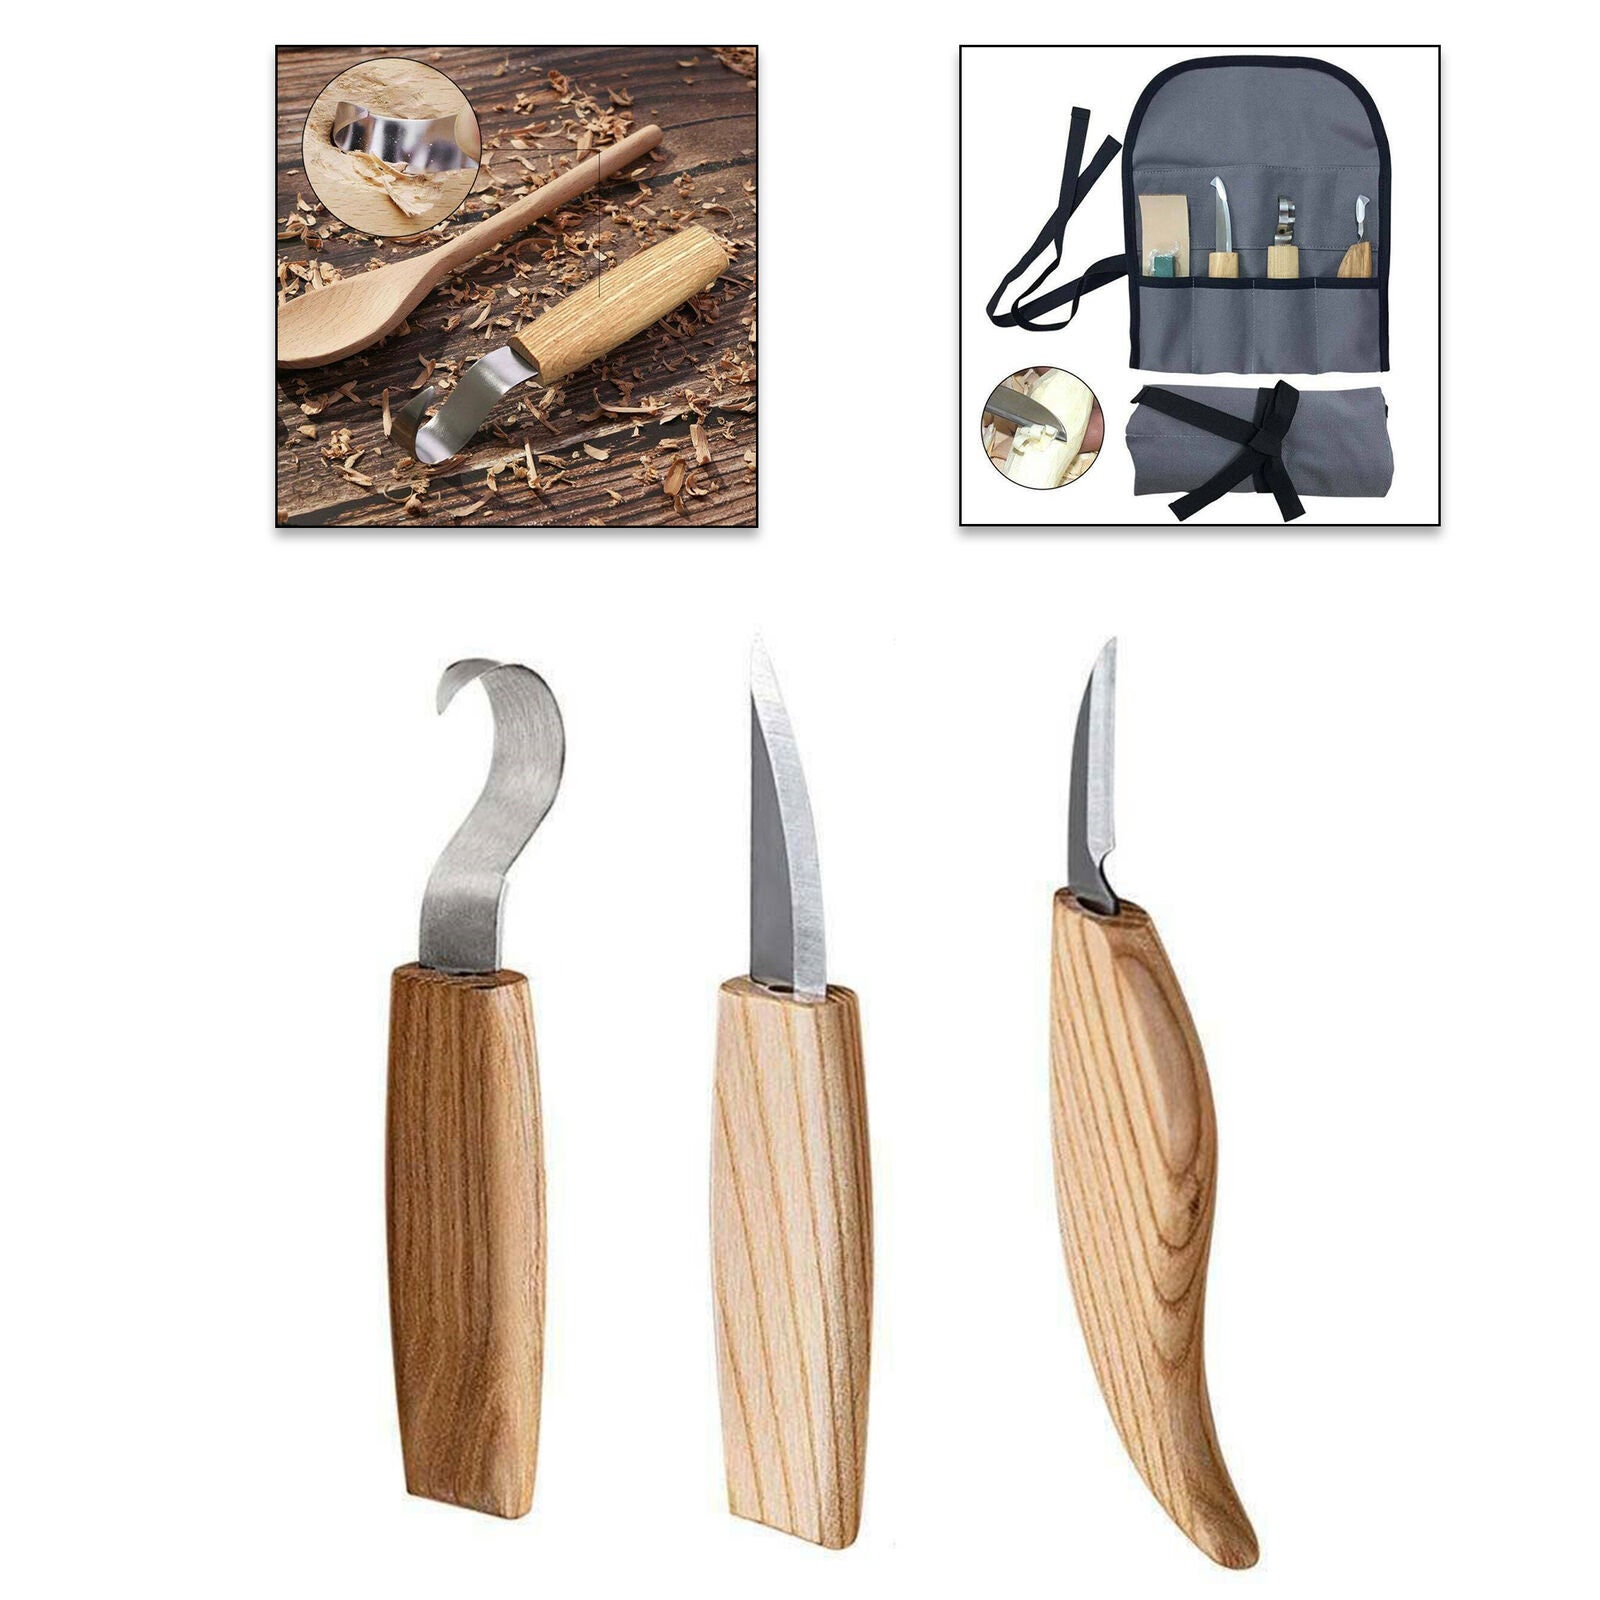 Carving and Detailing Knife, High Carbon Steel Wood Carving Knife, Layer  Knife, Planing Knife, Wood Carving Knife, Whittling Knives 